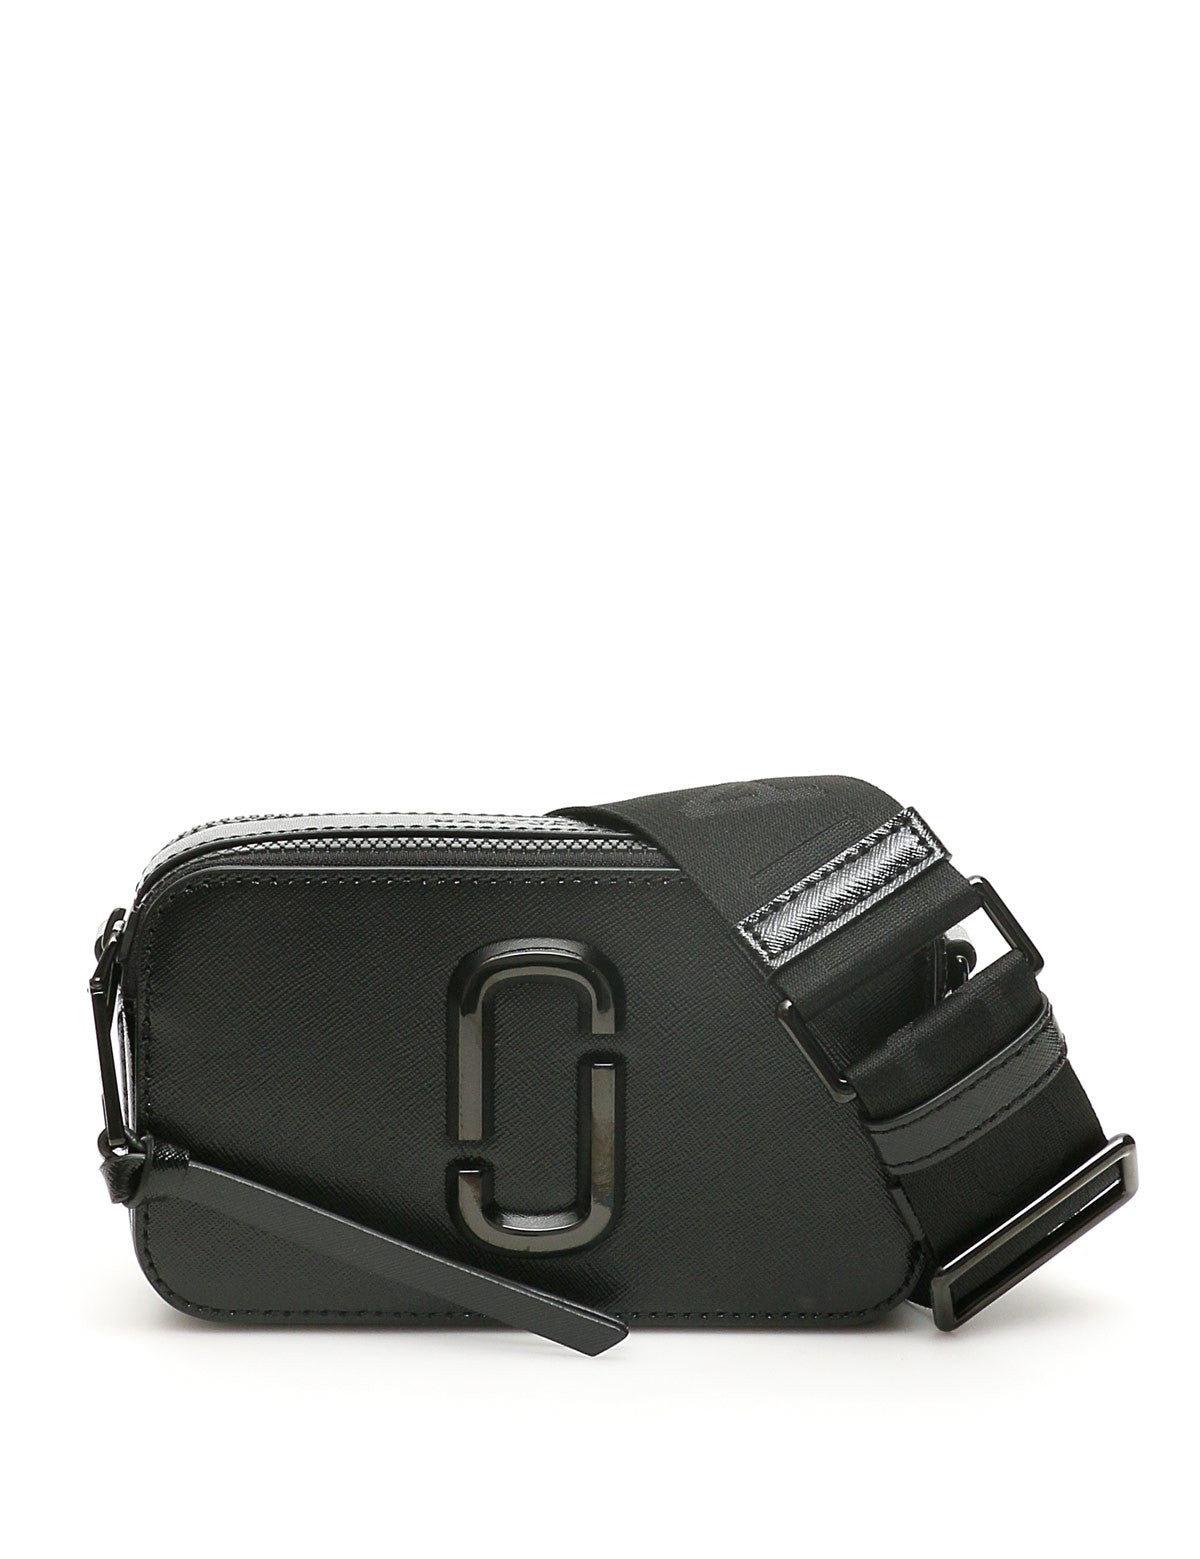 marc-jacobs-the-snapshot-small-camera-bag_dc4a2bf3-8fba-4668-916a-1aadf83f29e0.jpg